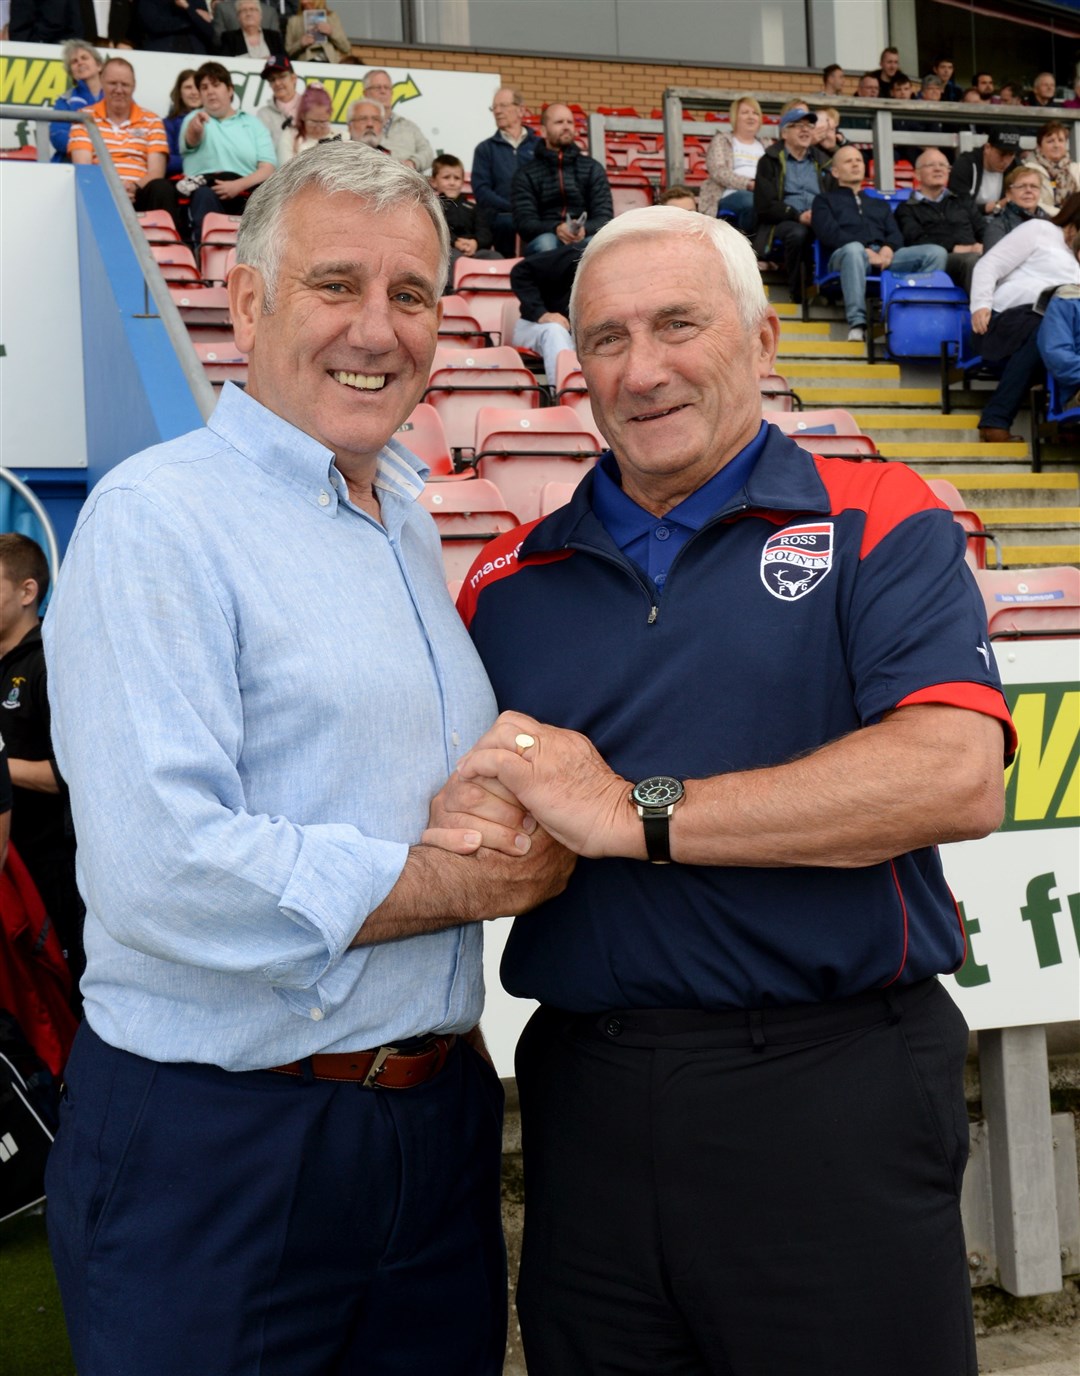 Bobby Wilson (right) took Ross County from an amateur club to Highland League champions – and beyond into the SFL.